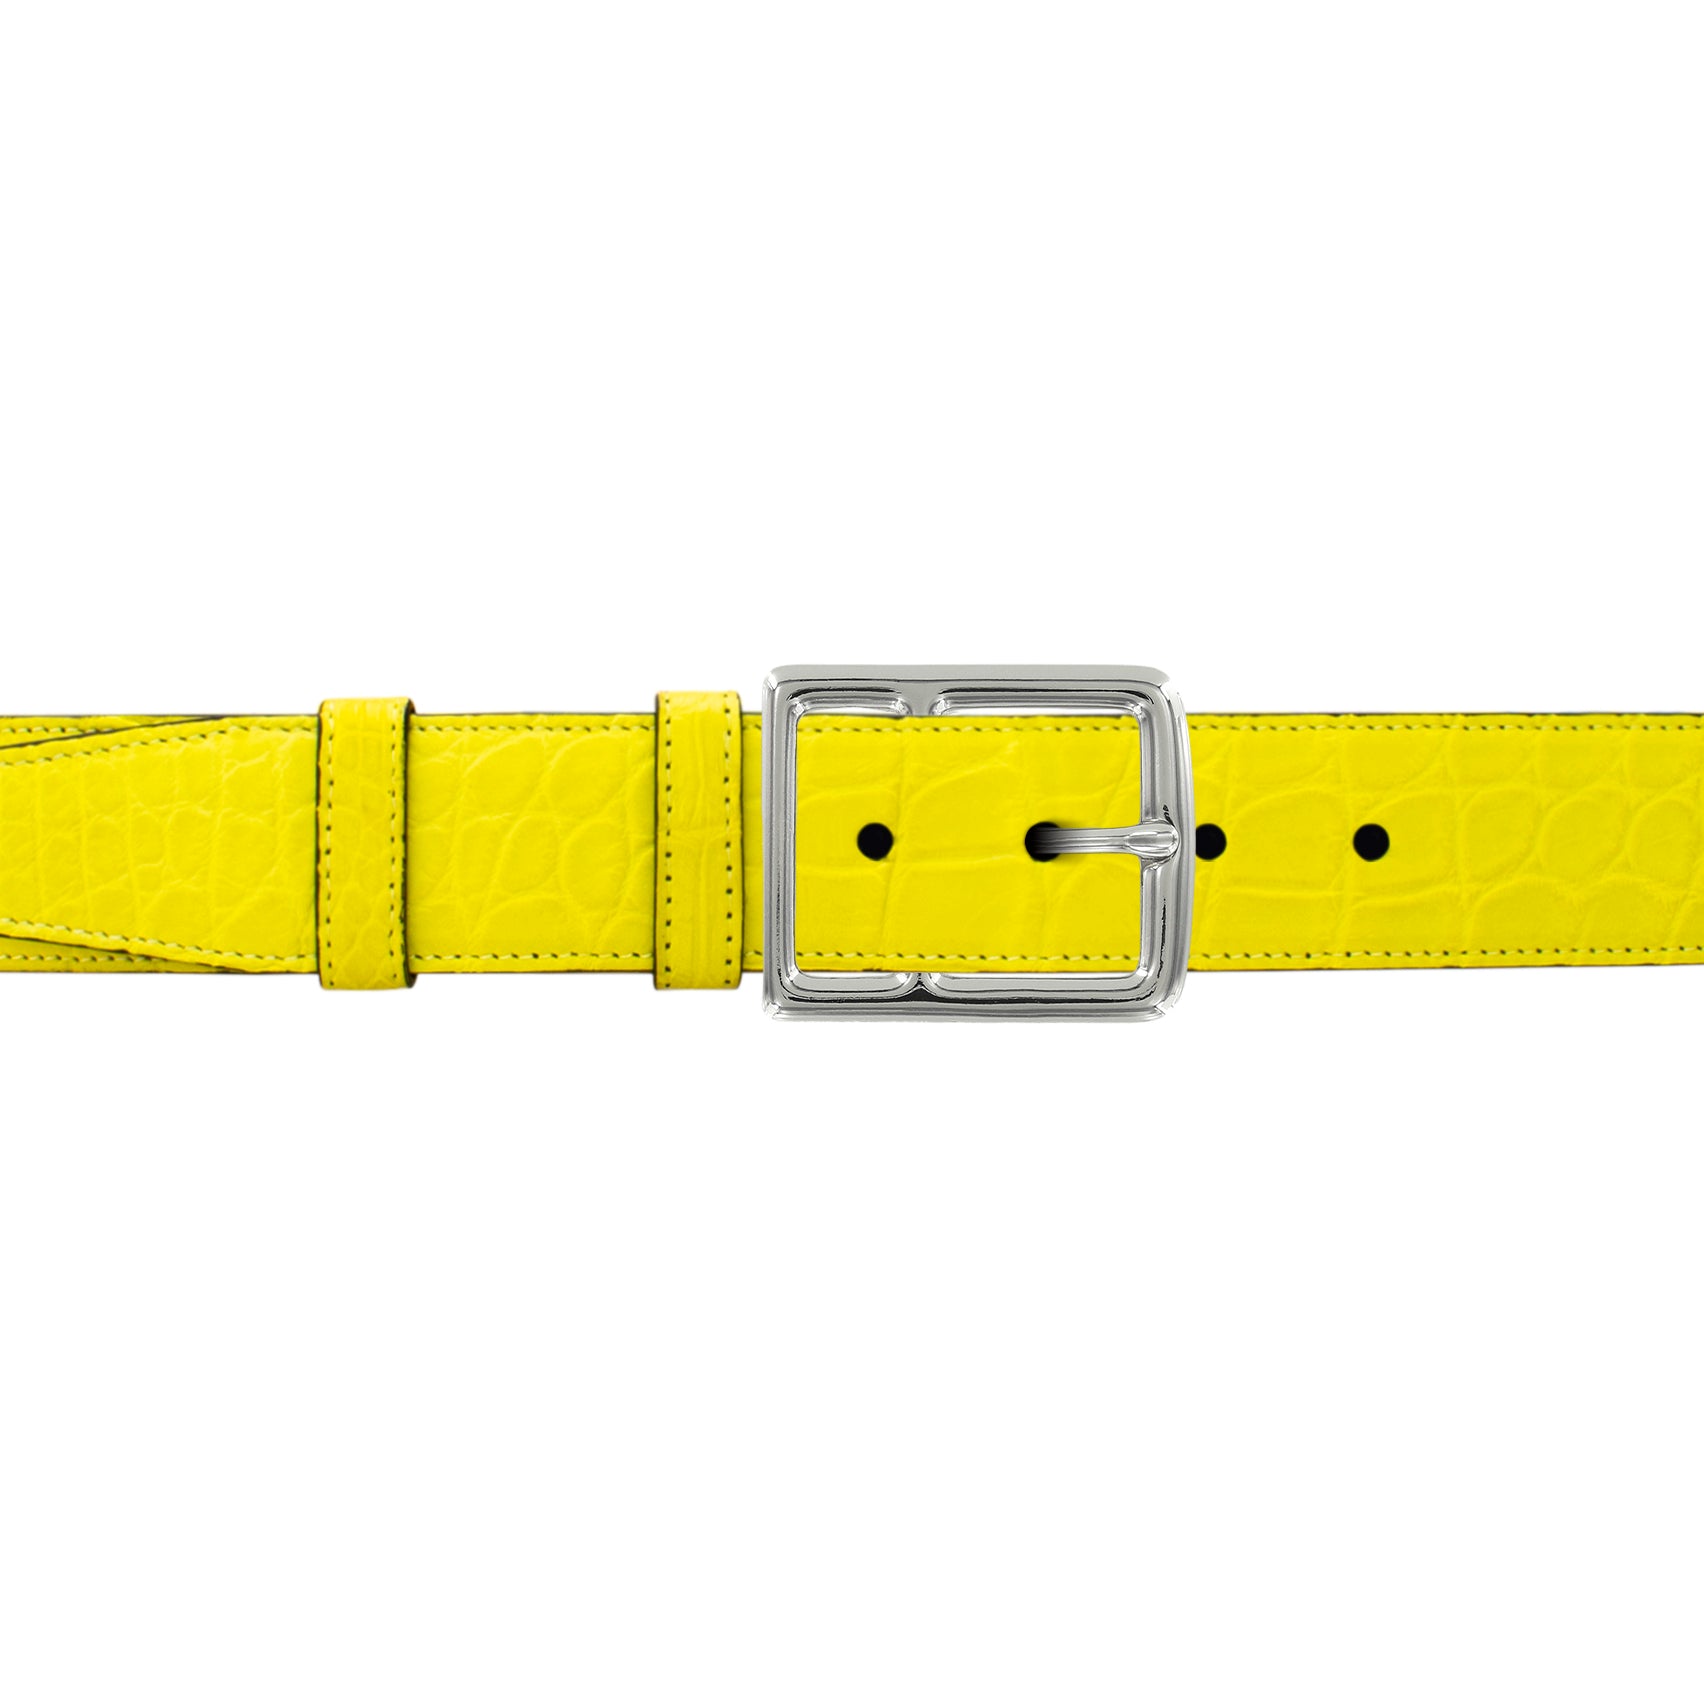 1 1/2" Canary Seasonal Belt with Crawford Casual Buckle in Polished Nickel